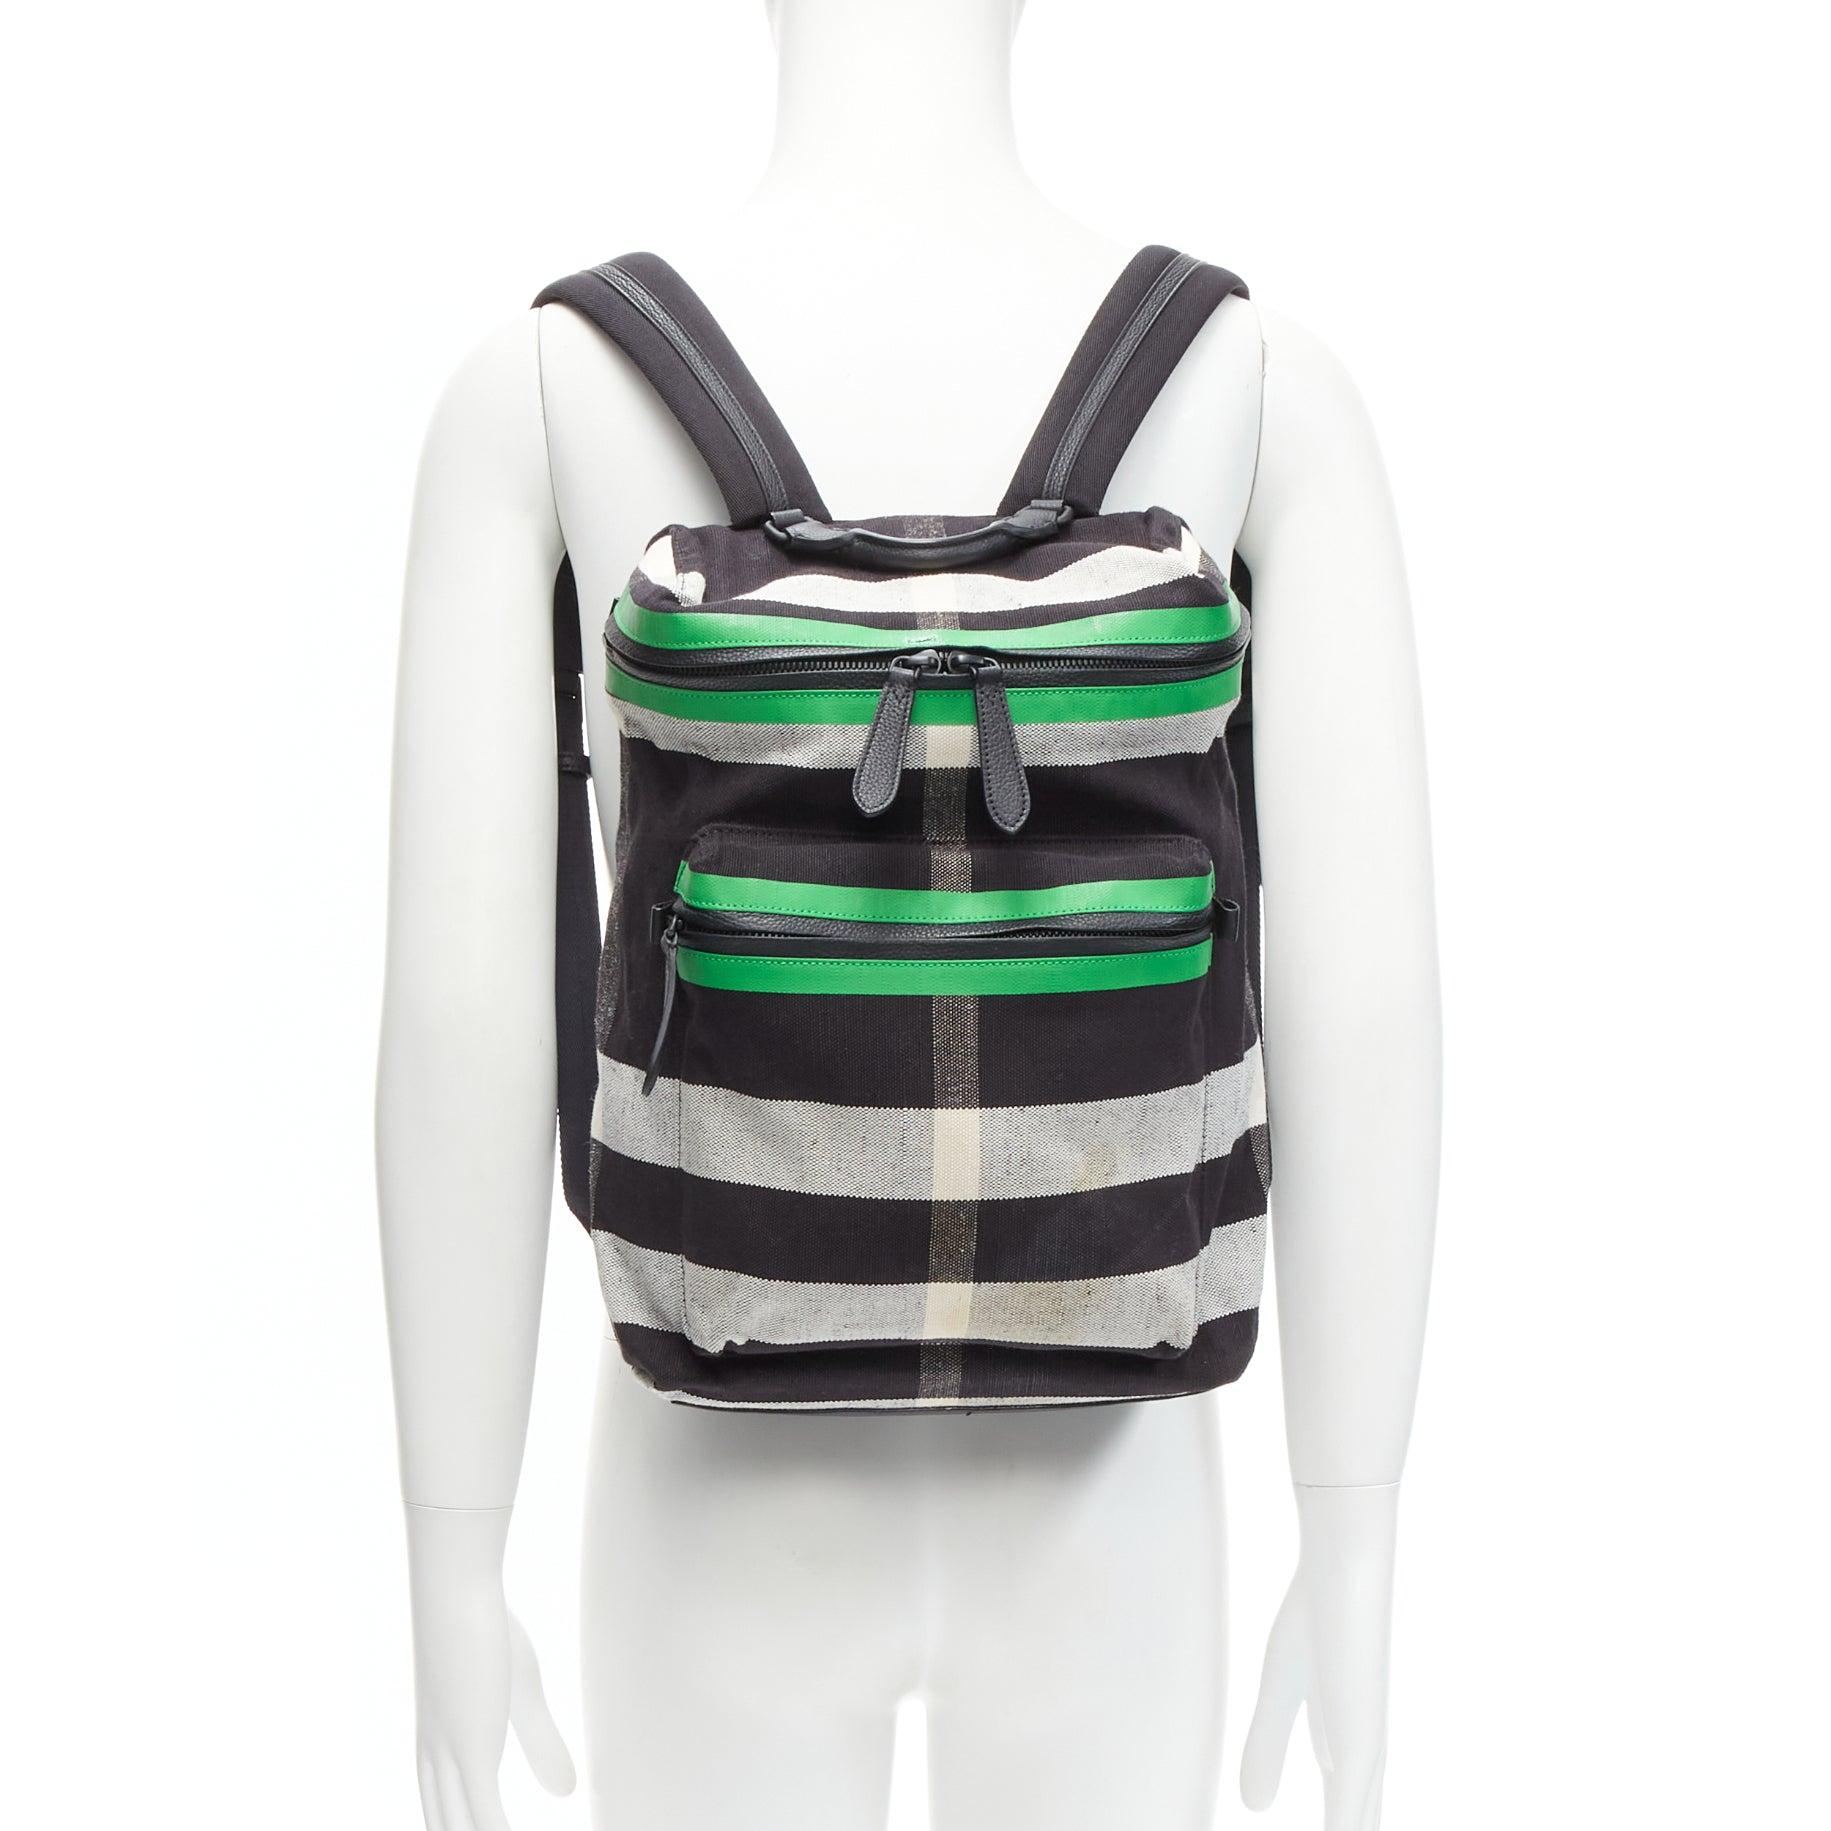 BURBERRY Donny House Check green black fabric leather trim backpack bag
Reference: TGAS/D00770
Brand: Burberry
Model: Donny
Collection: House Check
Material: Fabric, Leather
Color: Green, Multicolour
Pattern: Checkered
Closure: Zip
Lining: Black